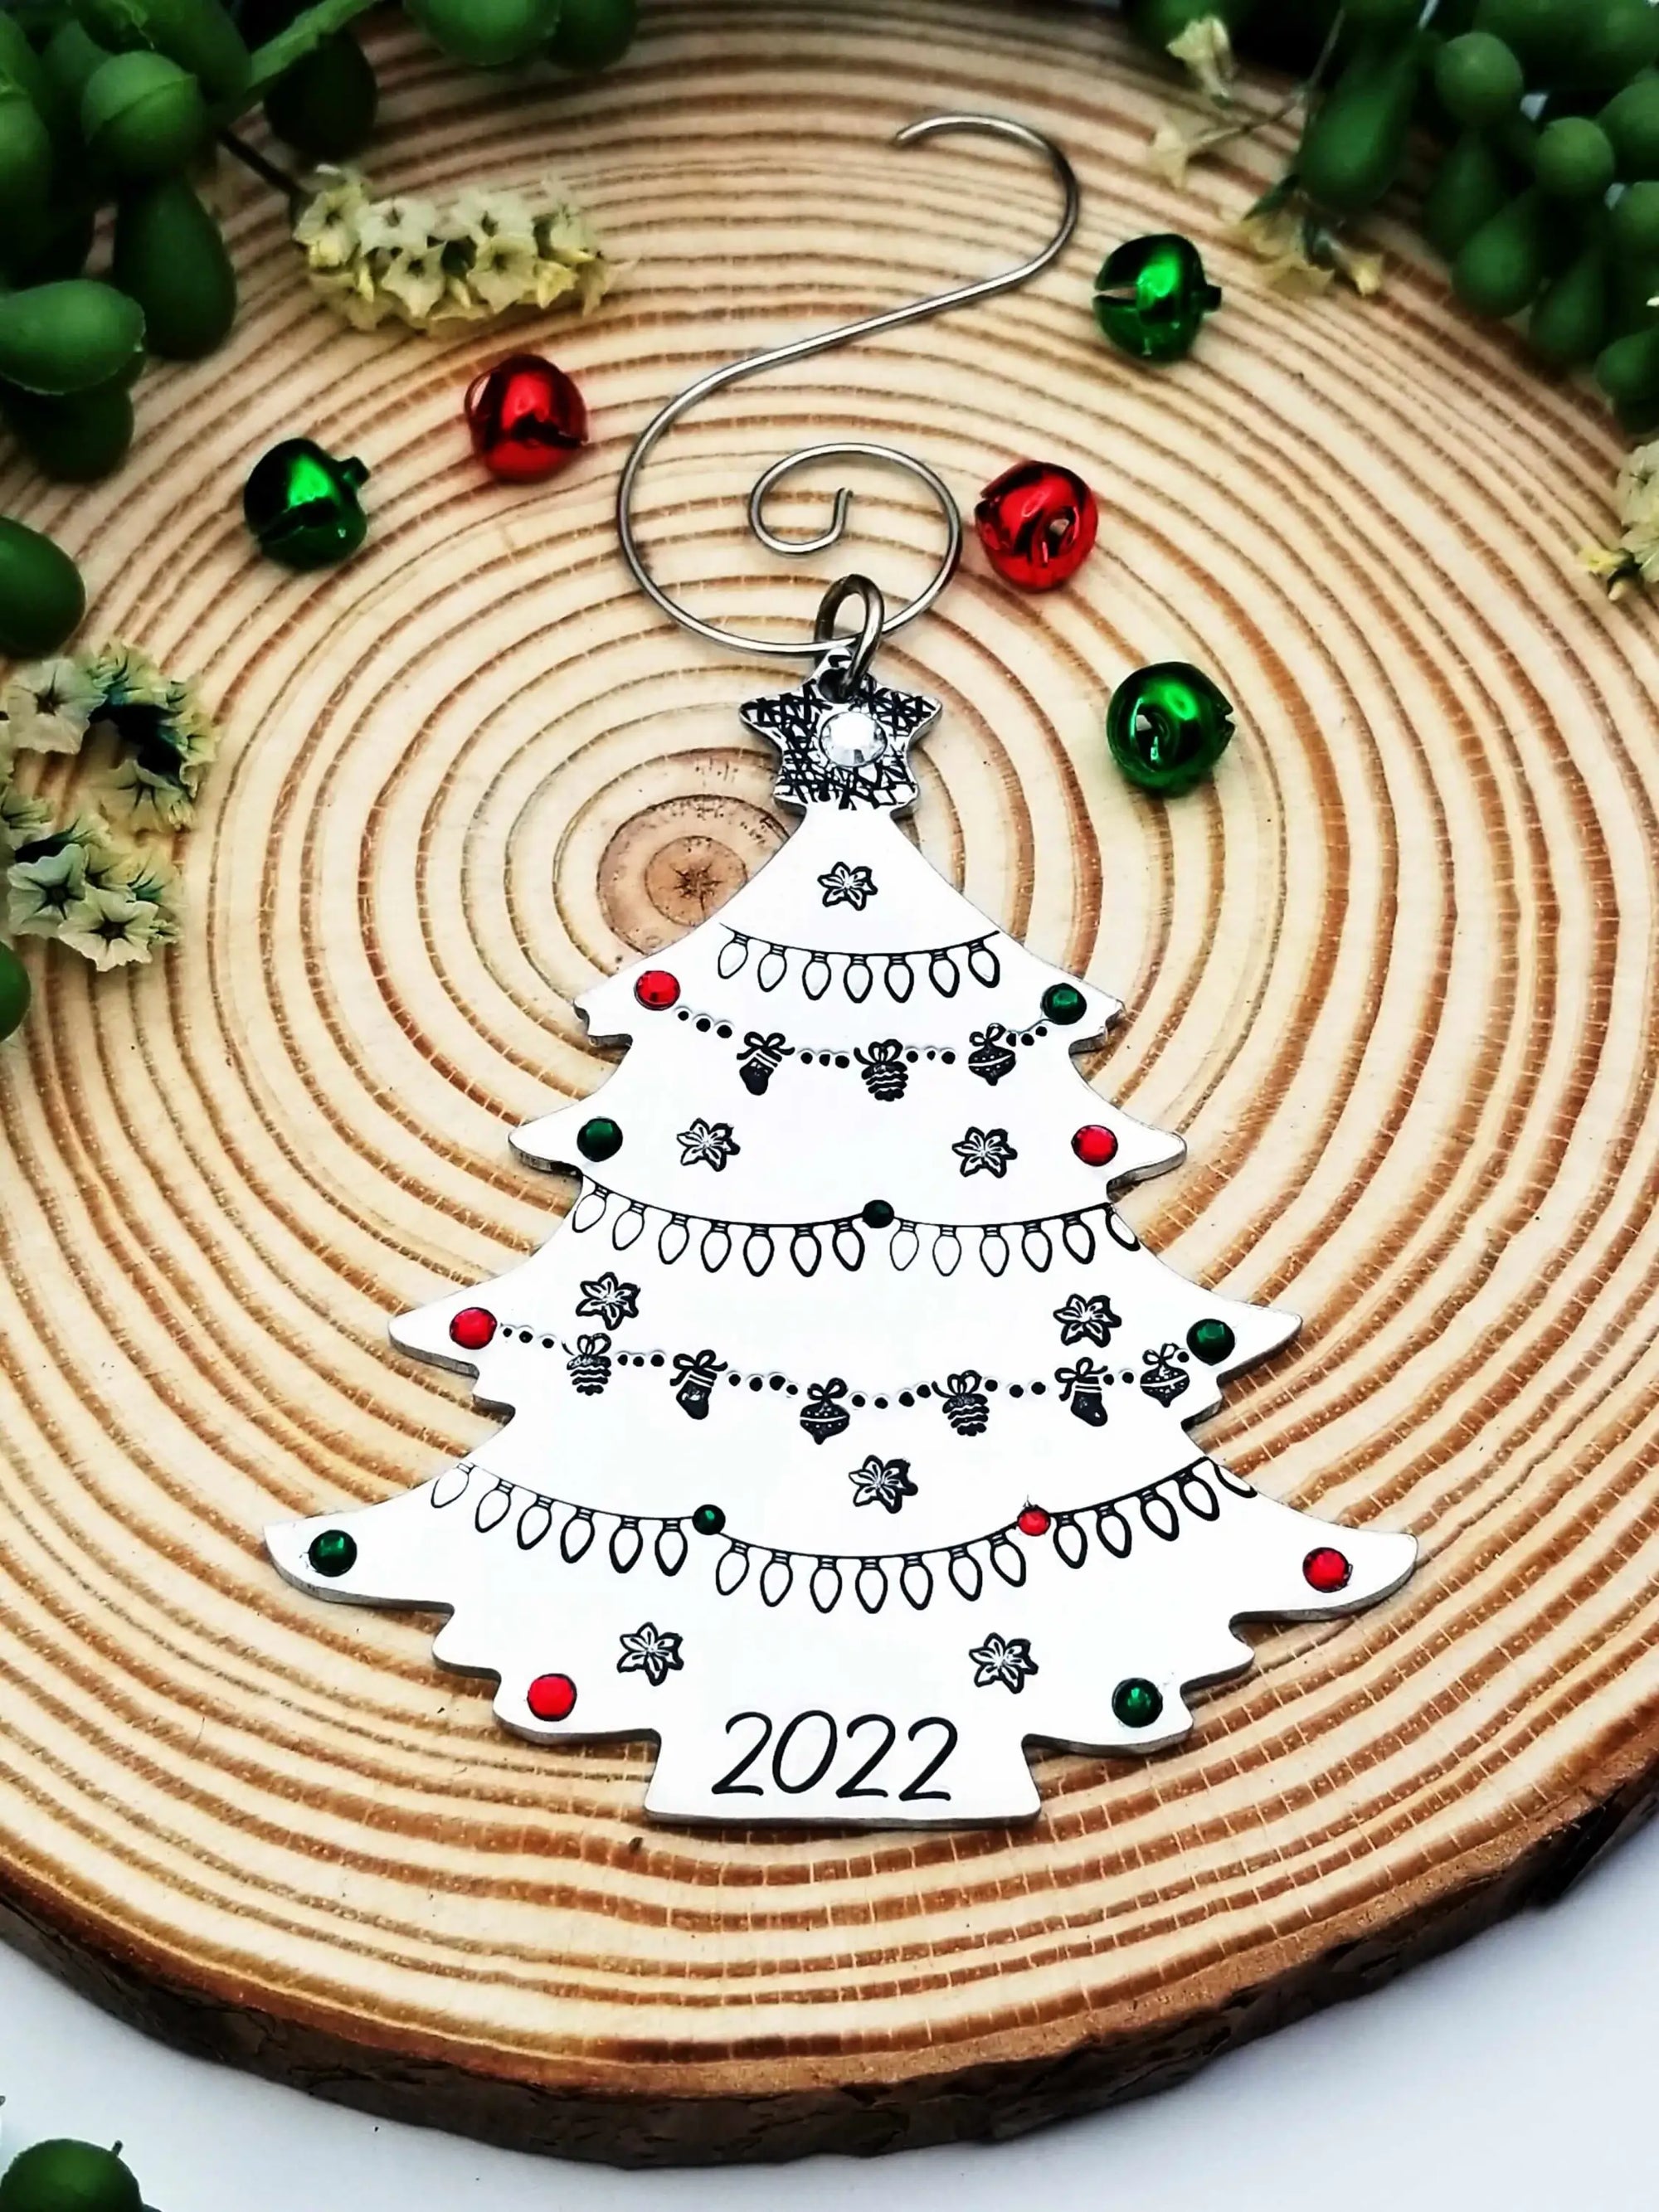 2022 Custom Christmas Ornament, Yearly Ornament, Handmade Ornament, Personalized Christmas Ornament, Funny Ornament Gift